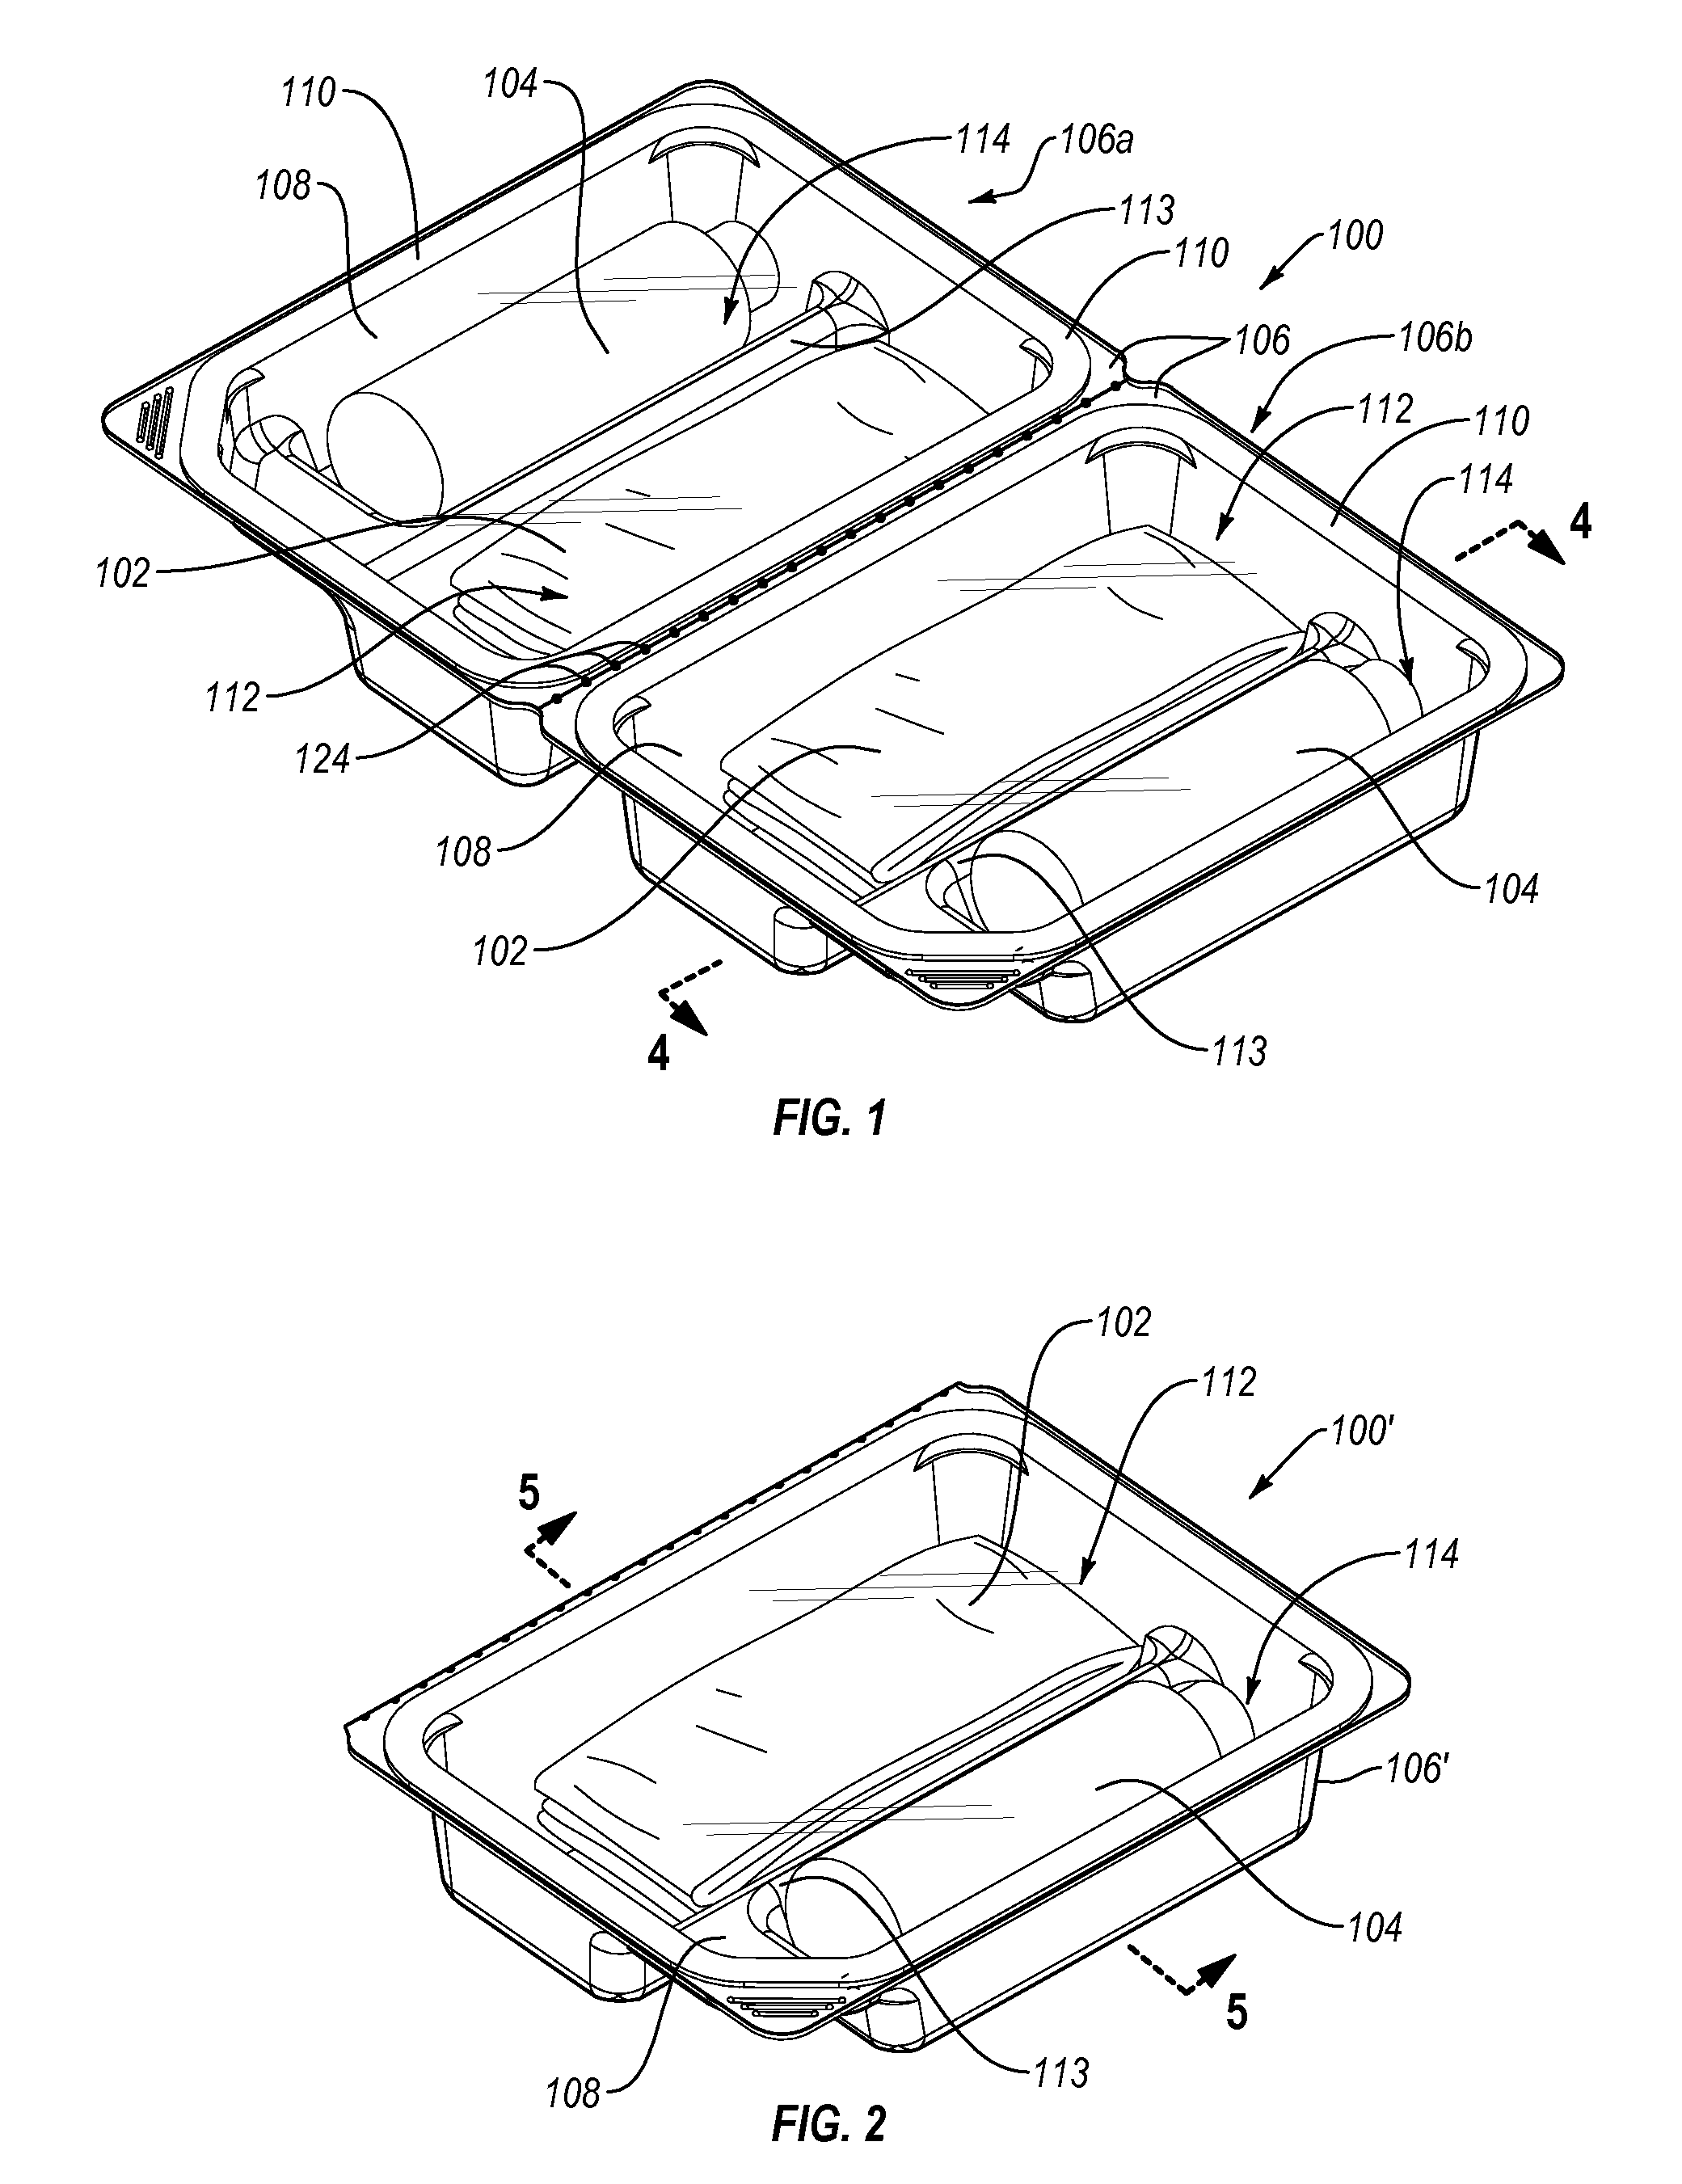 Disinfectant delivery system and method for disinfection